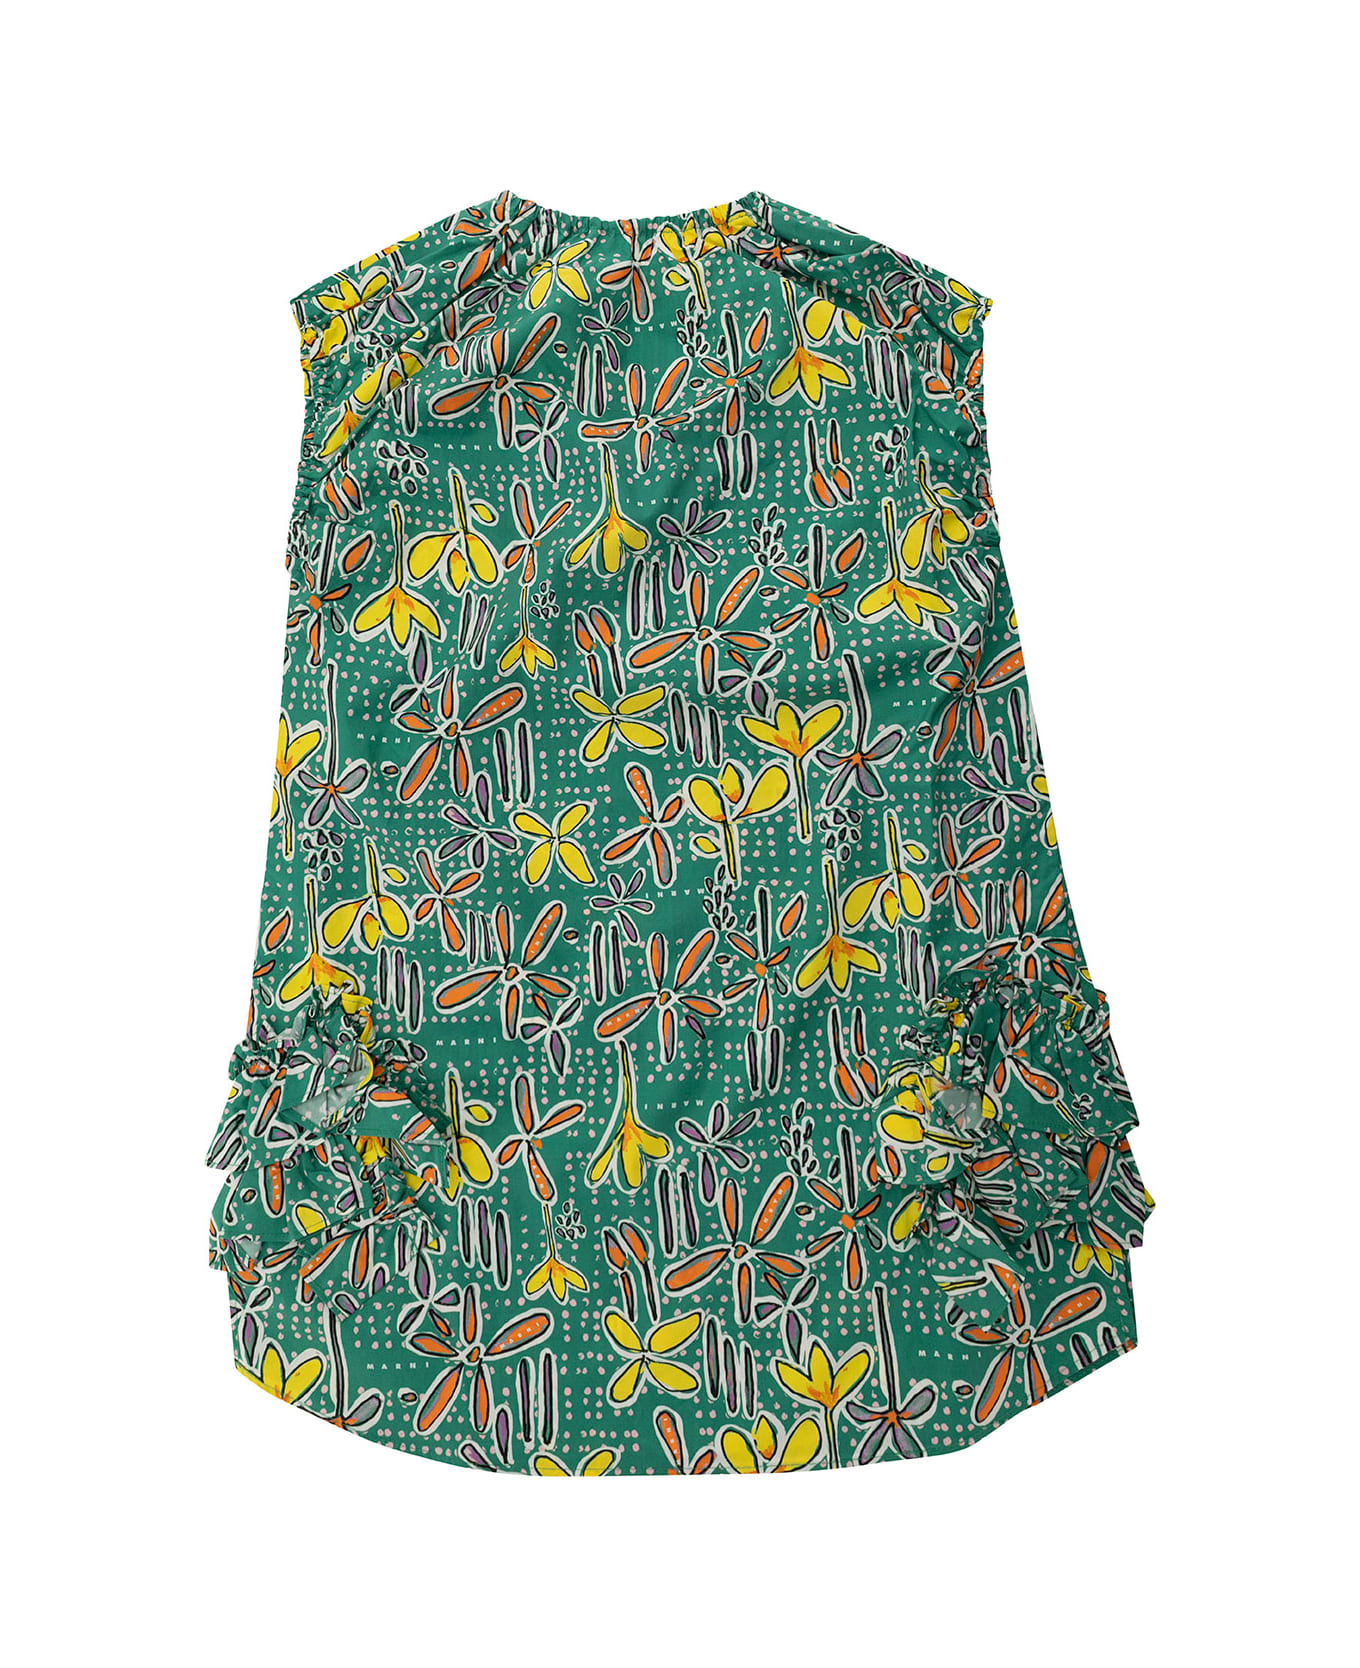 Marni Green Dress With Flower Print In Cotton Girl - Green